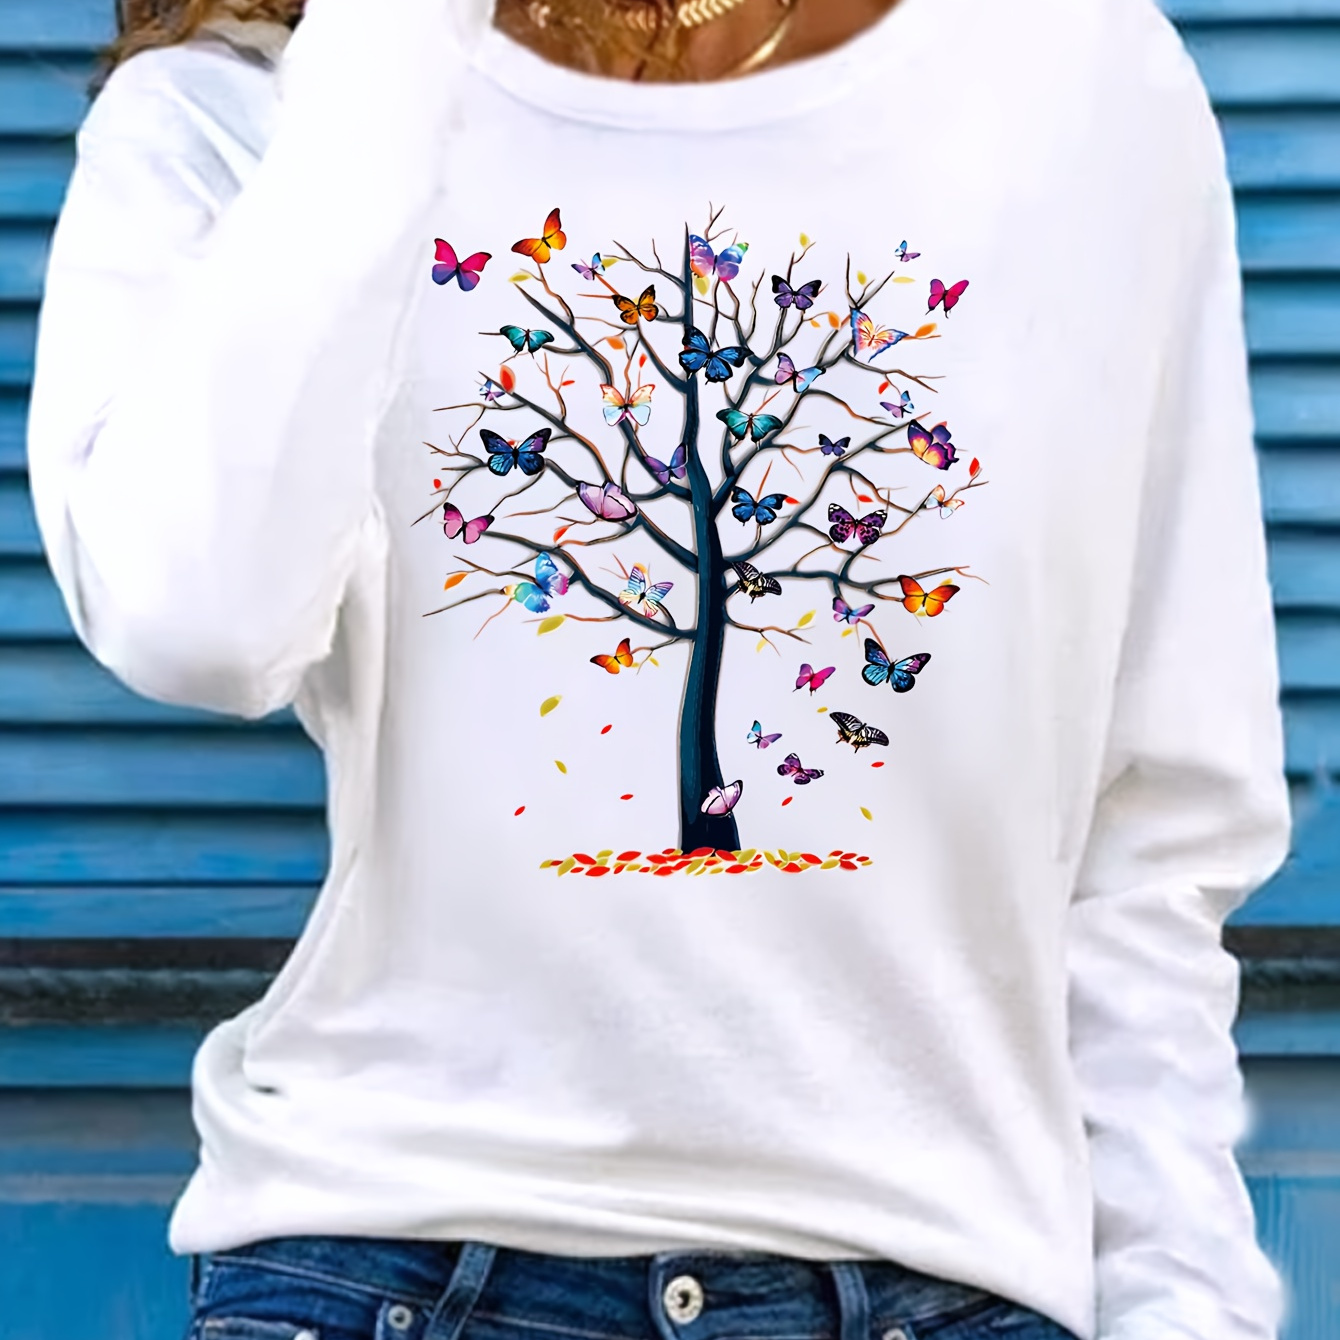 

Leaves & Butterflies Print T-shirt, Long Sleeve Crew Neck Casual Top For Spring & Fall, Women's Clothing